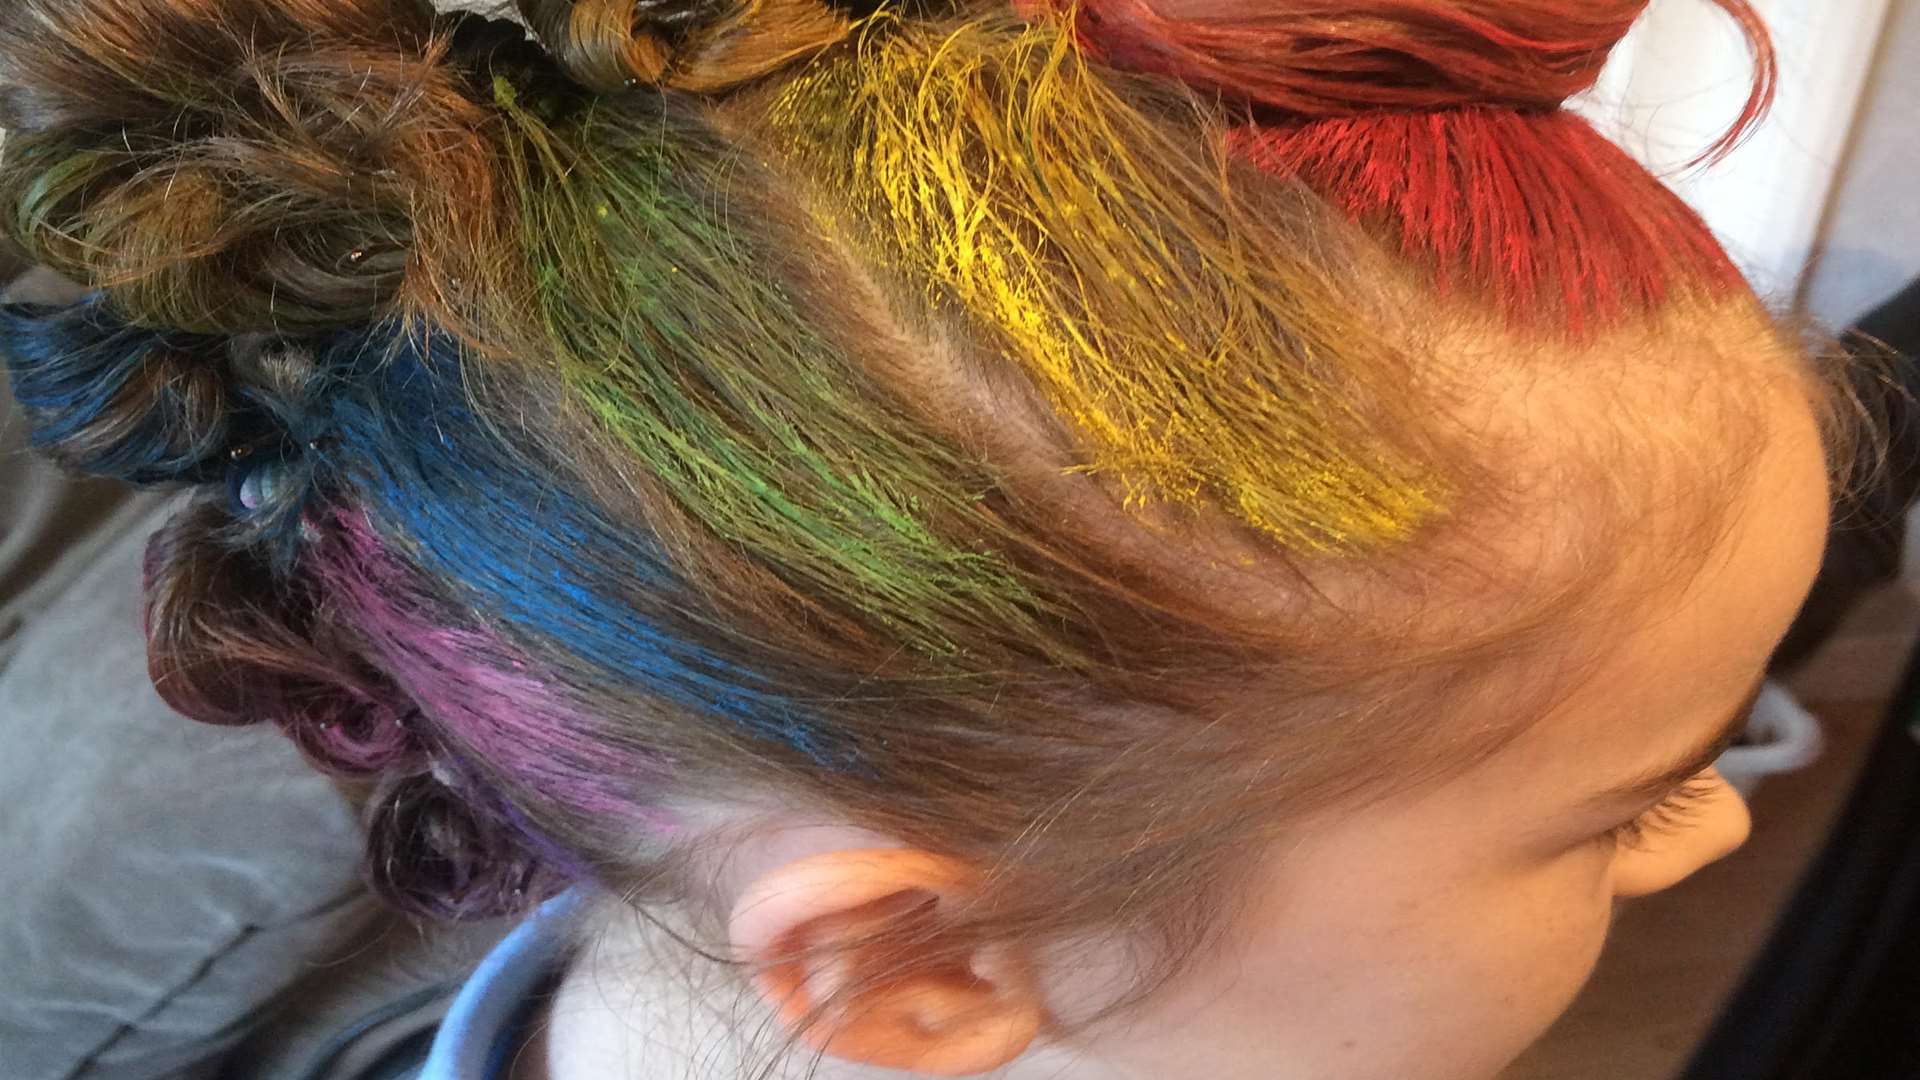 Phoebe is Rainbow Dash from My Little Pony